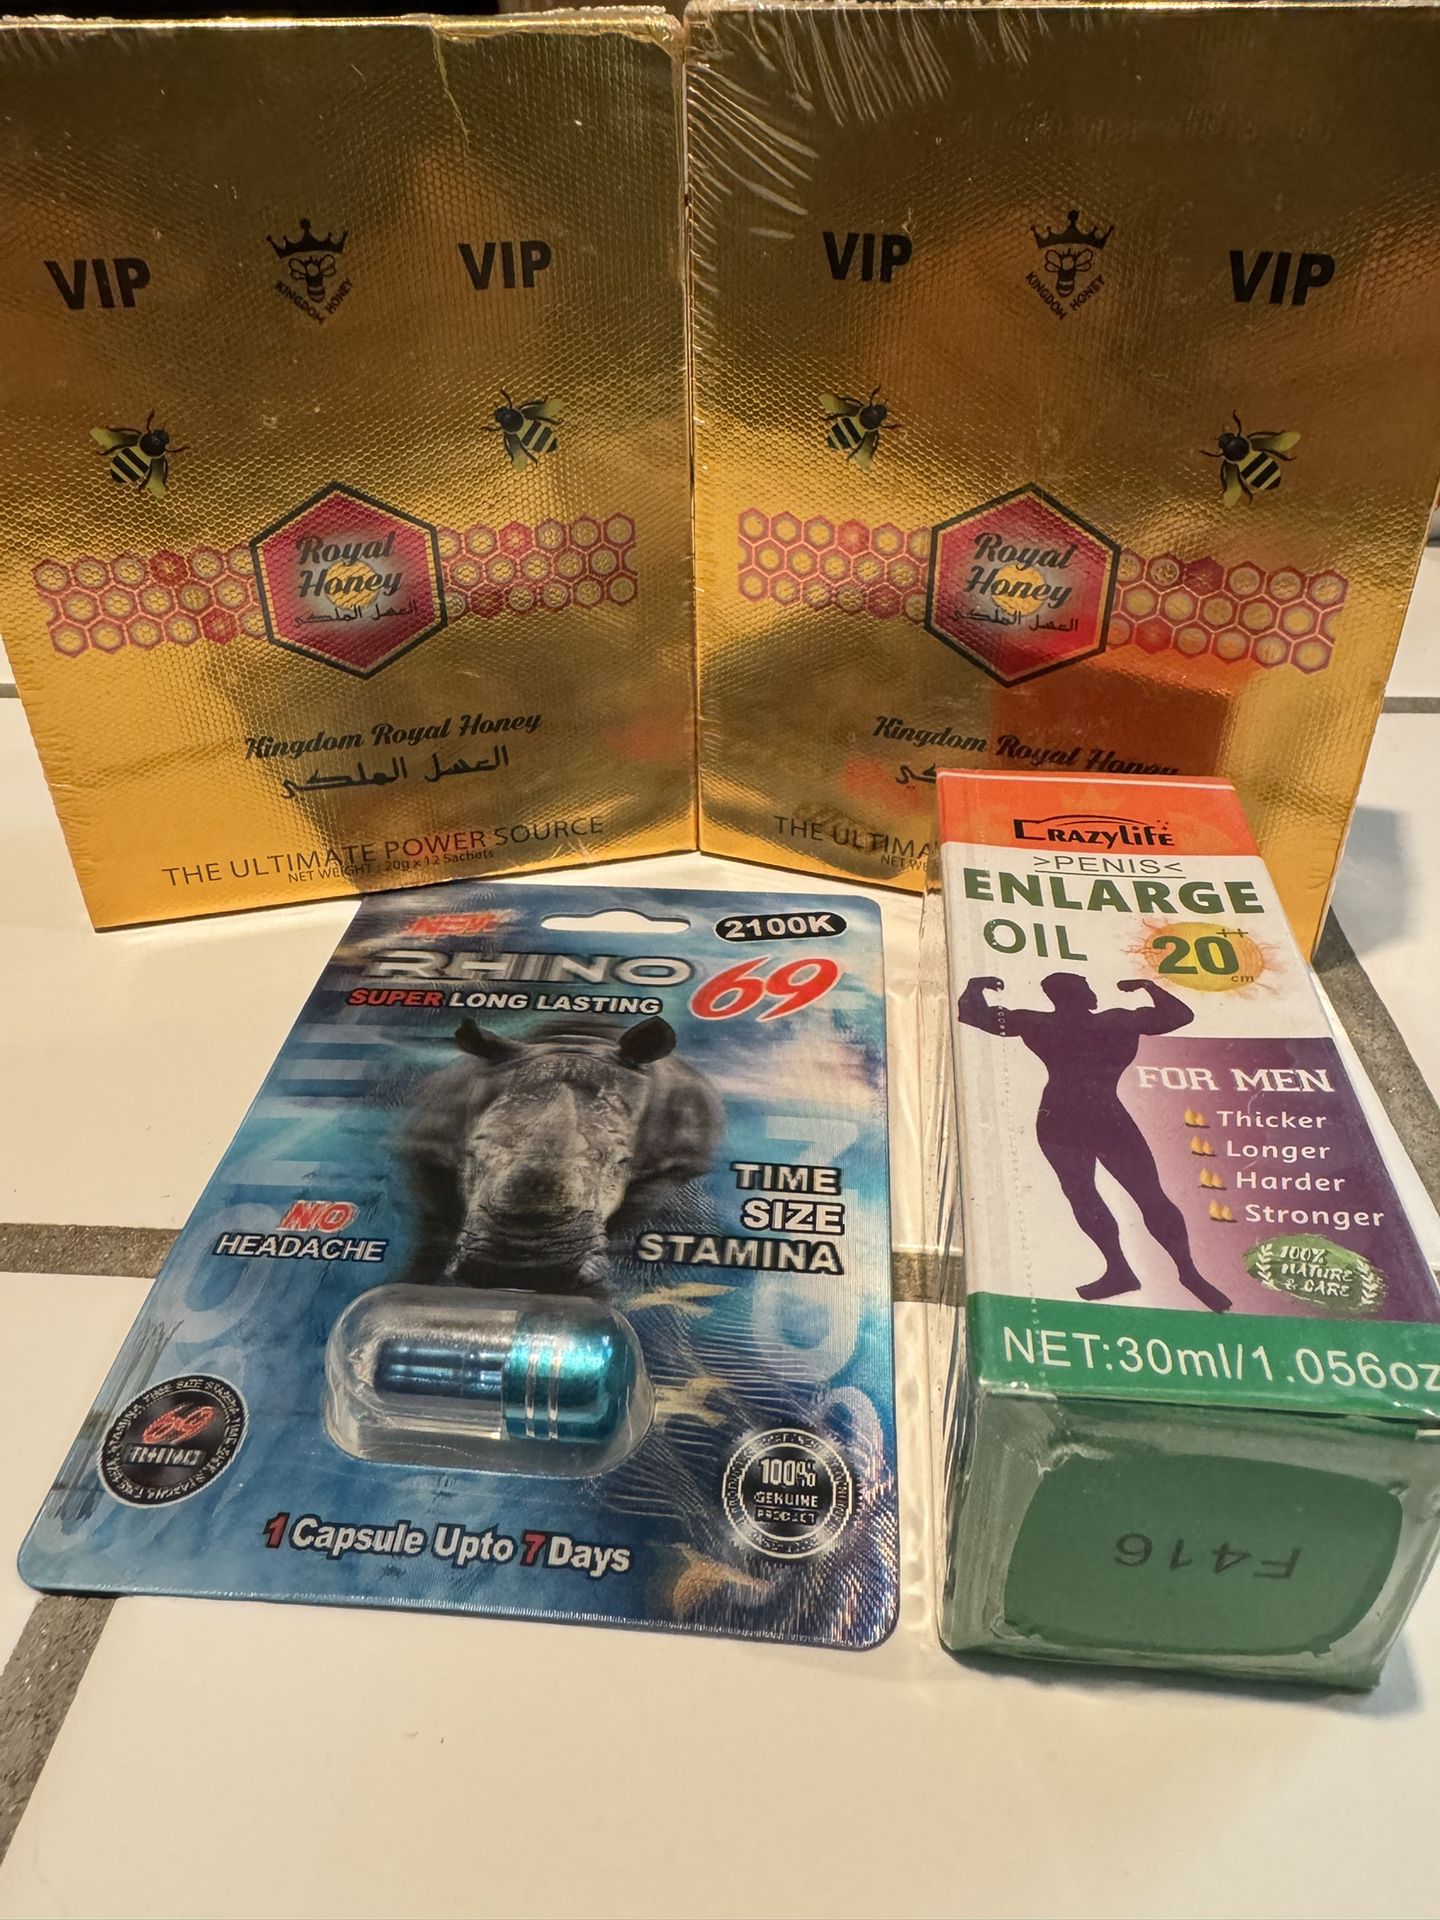 Special Package Deal / Paquete Especial / 2 VIP Honeys , 1 Rhino, 1 Oil Energy